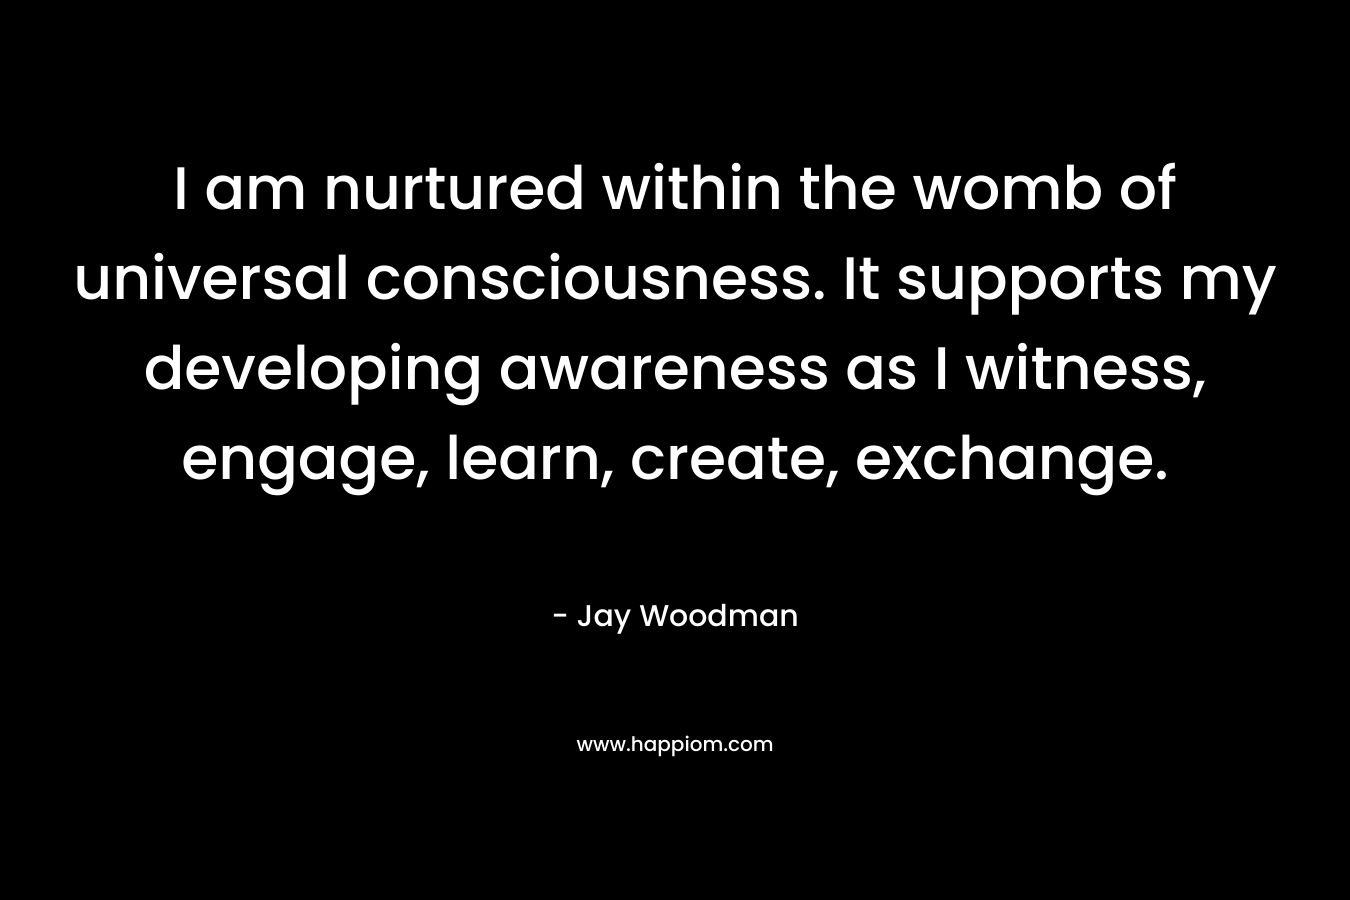 I am nurtured within the womb of universal consciousness. It supports my developing awareness as I witness, engage, learn, create, exchange.